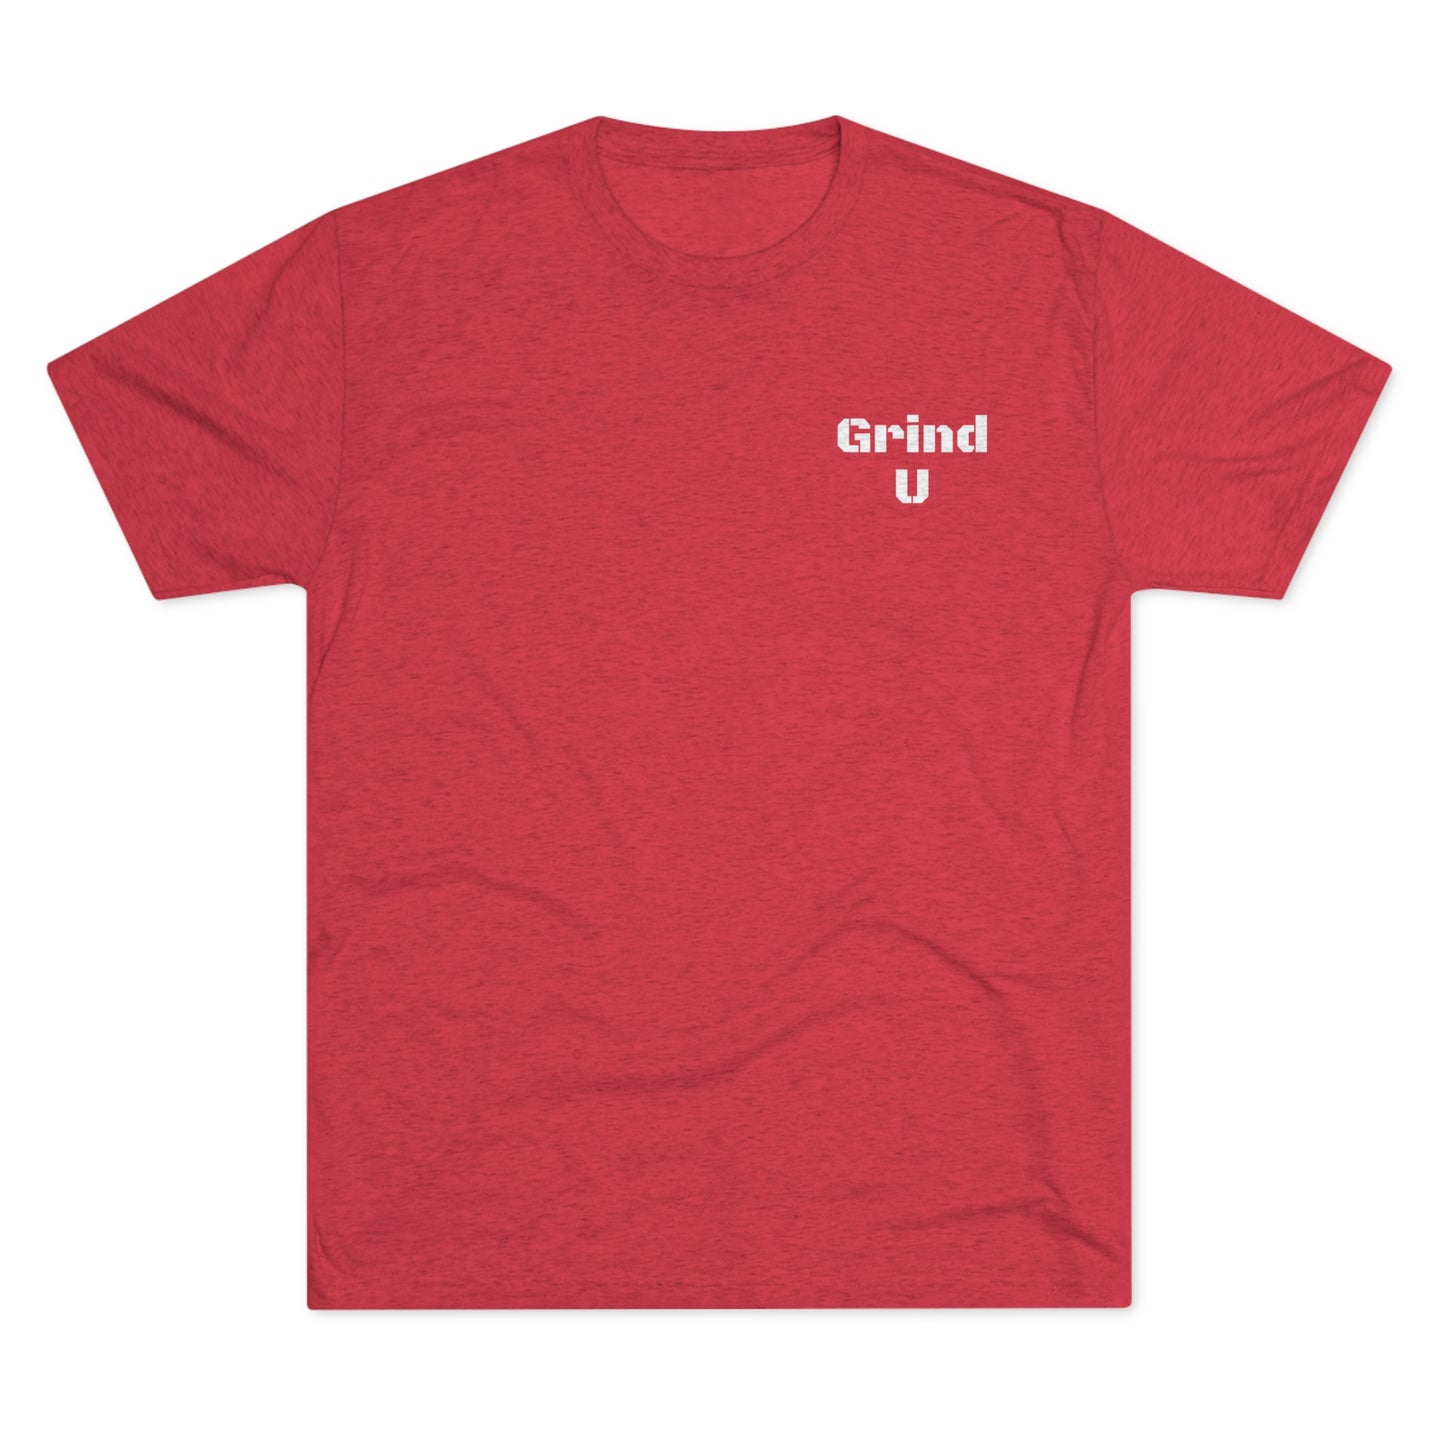 YOU VS YOU TRI-BLEND VINTAGE TEE RED